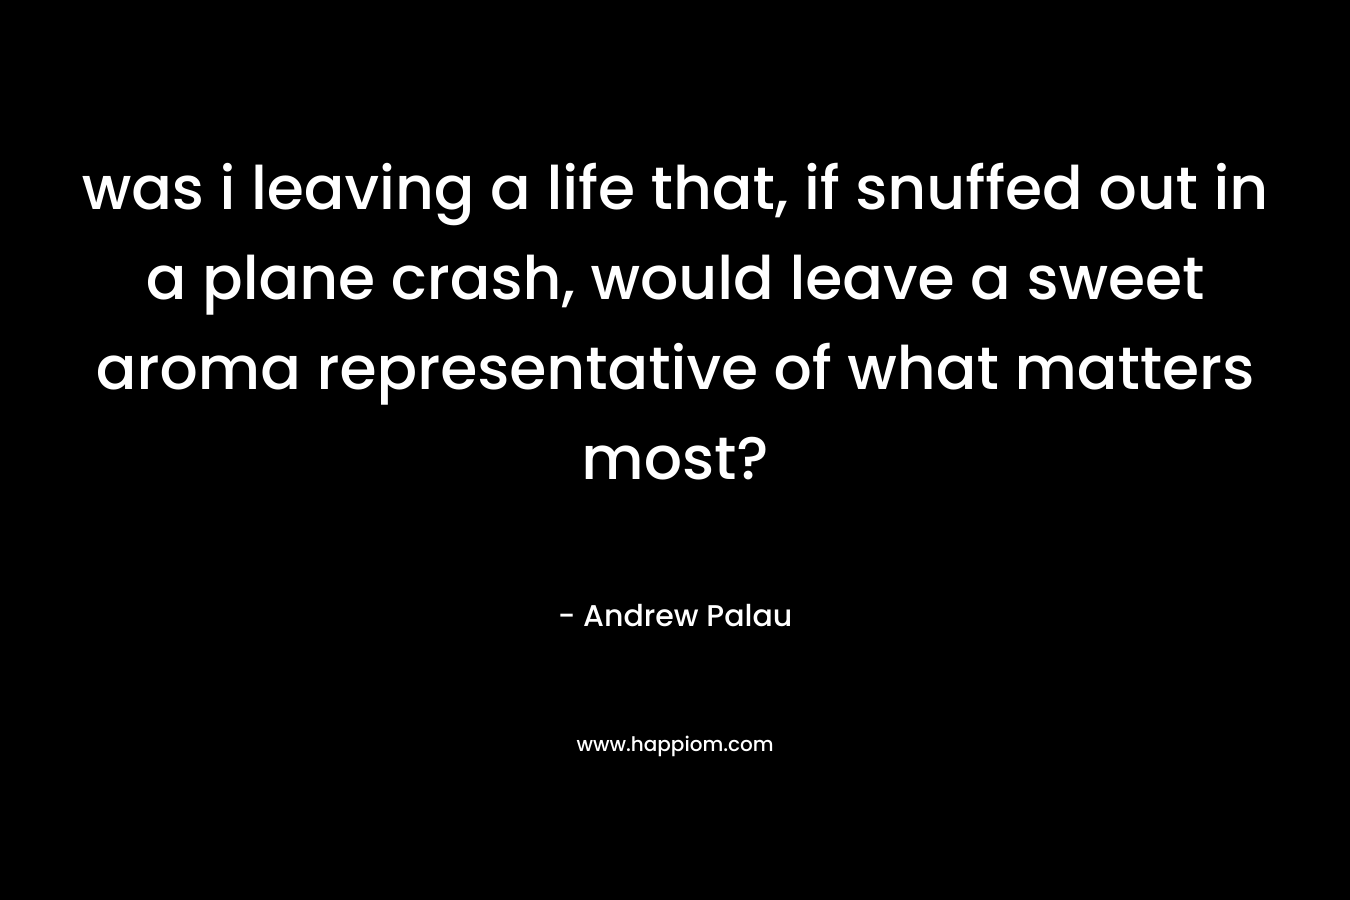 was i leaving a life that, if snuffed out in a plane crash, would leave a sweet aroma representative of what matters most? – Andrew Palau